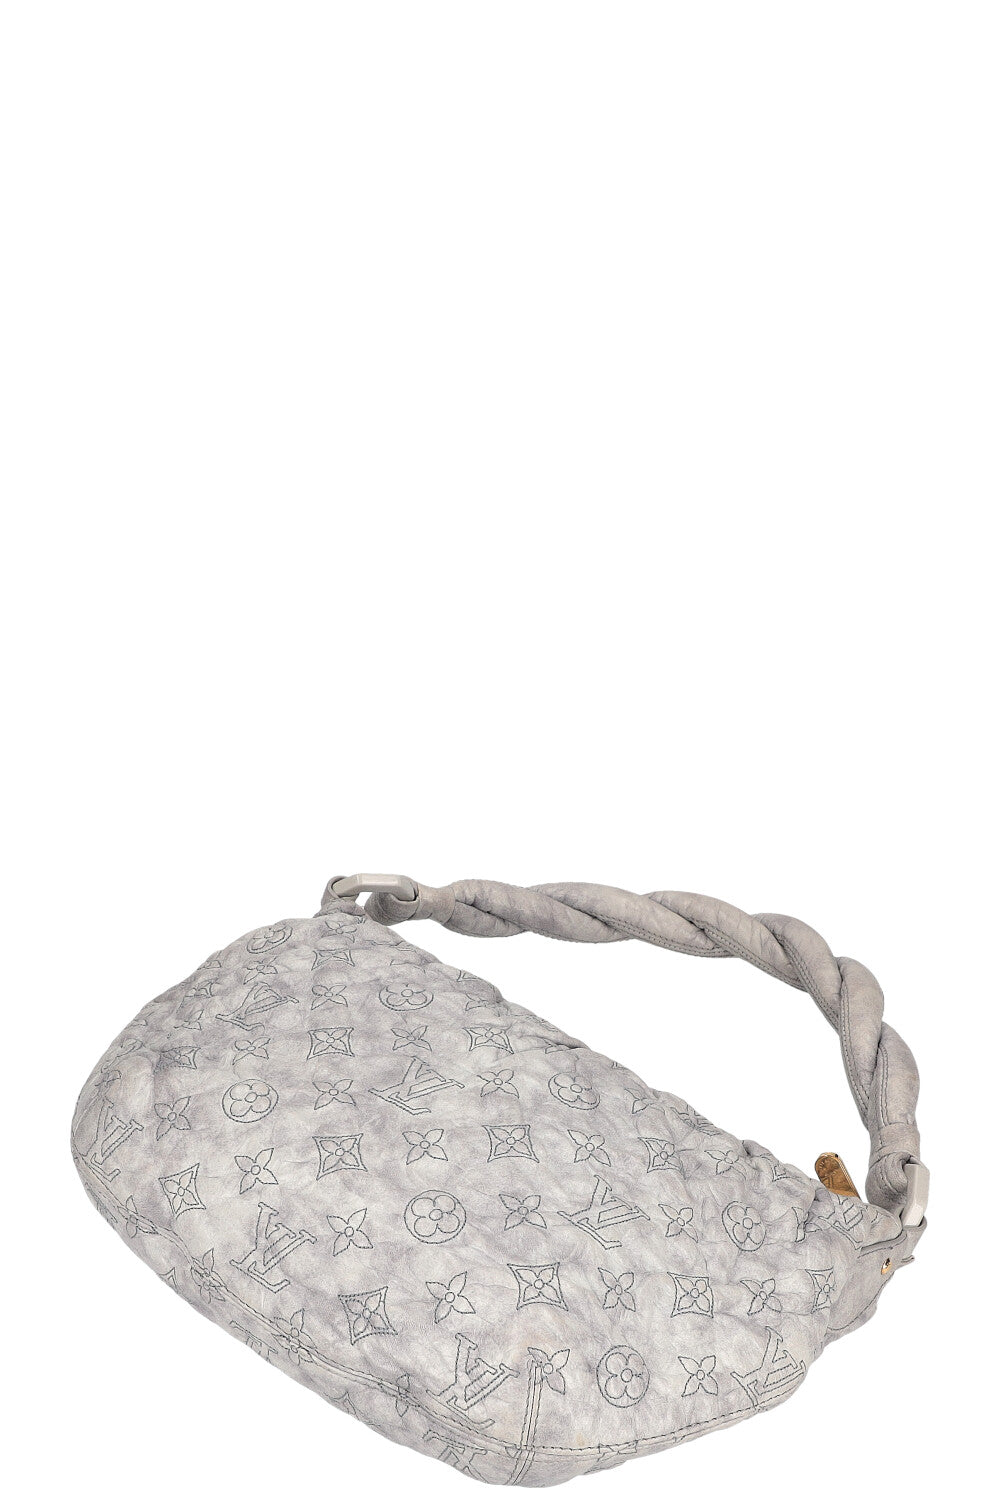 LOUIS VUITTON Olympe Nimbus PM Grey Hobo Shoulder Bag - Limited Edition